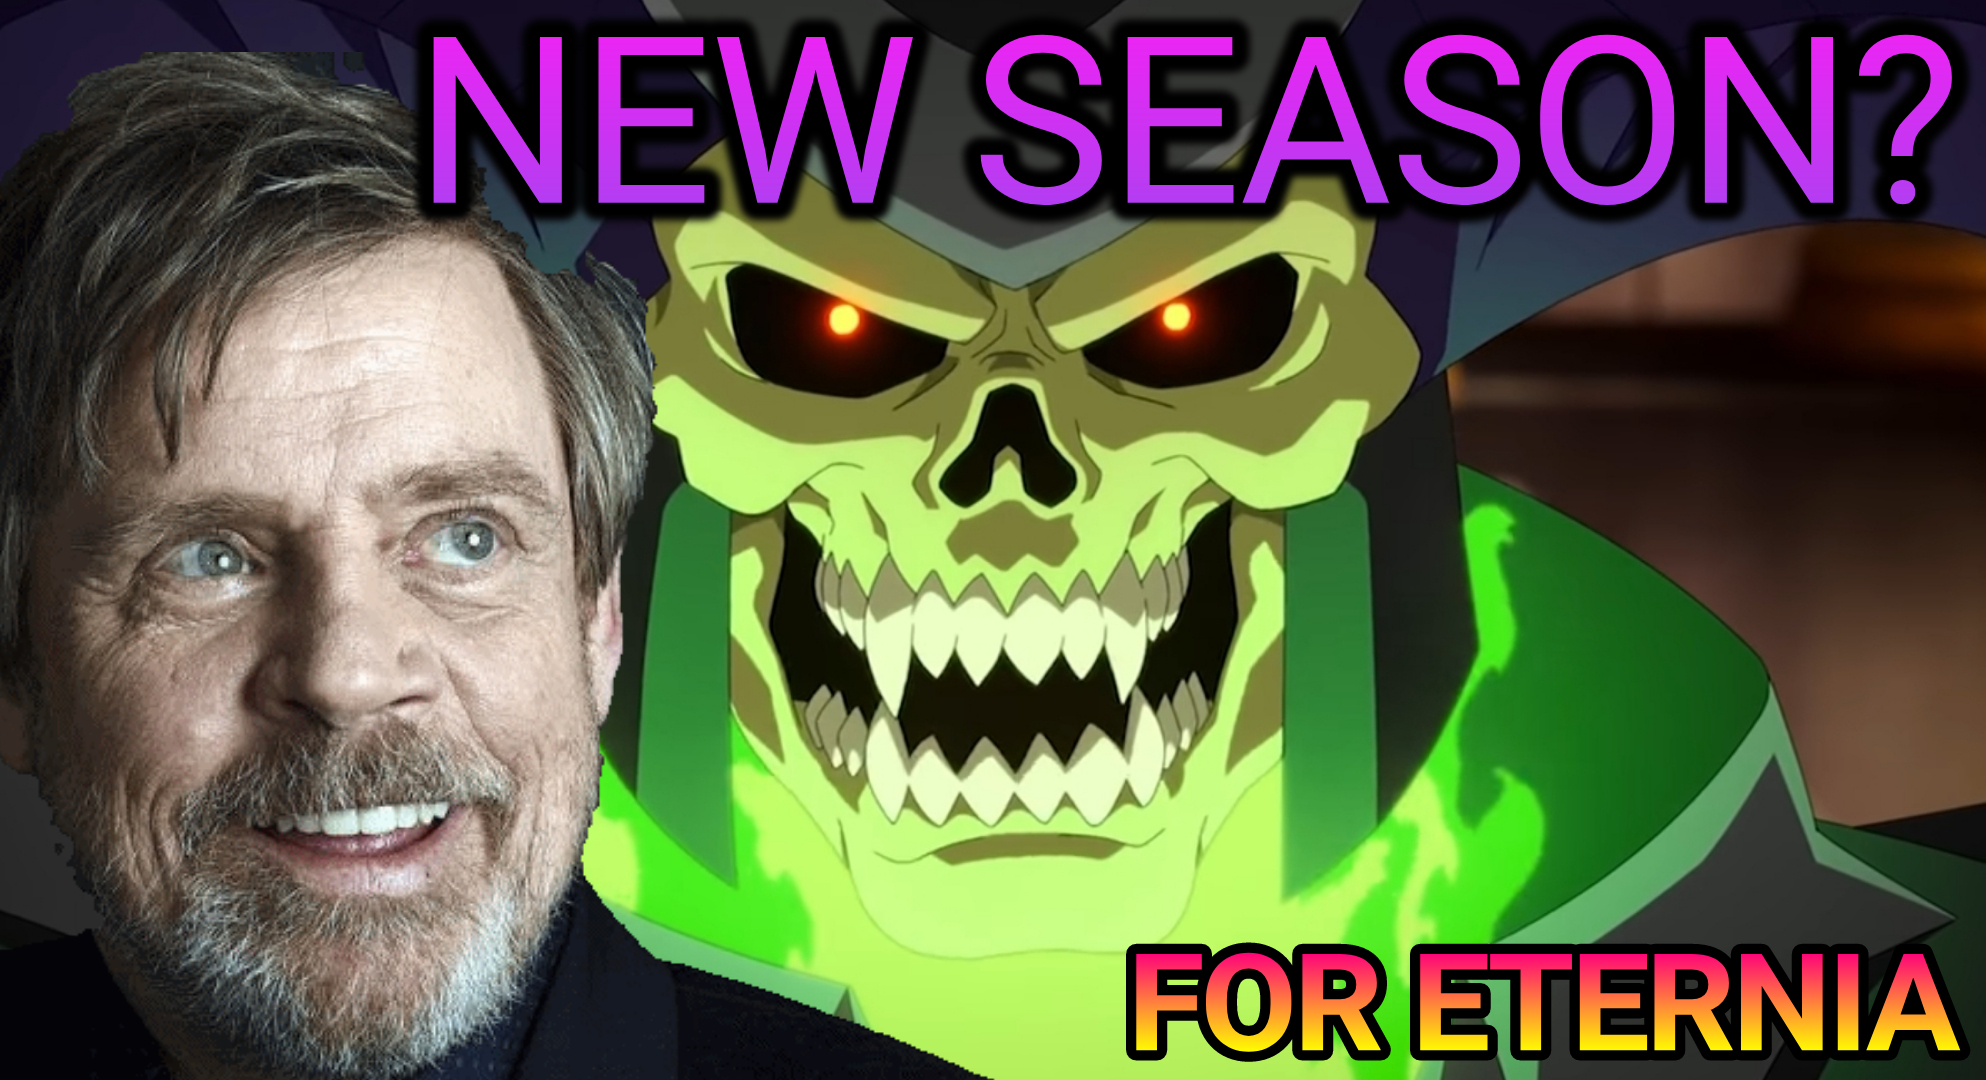 New Season to ”Masters of the Universe: Revelation” Confirmed by Mark Hamill? We discuss the news!